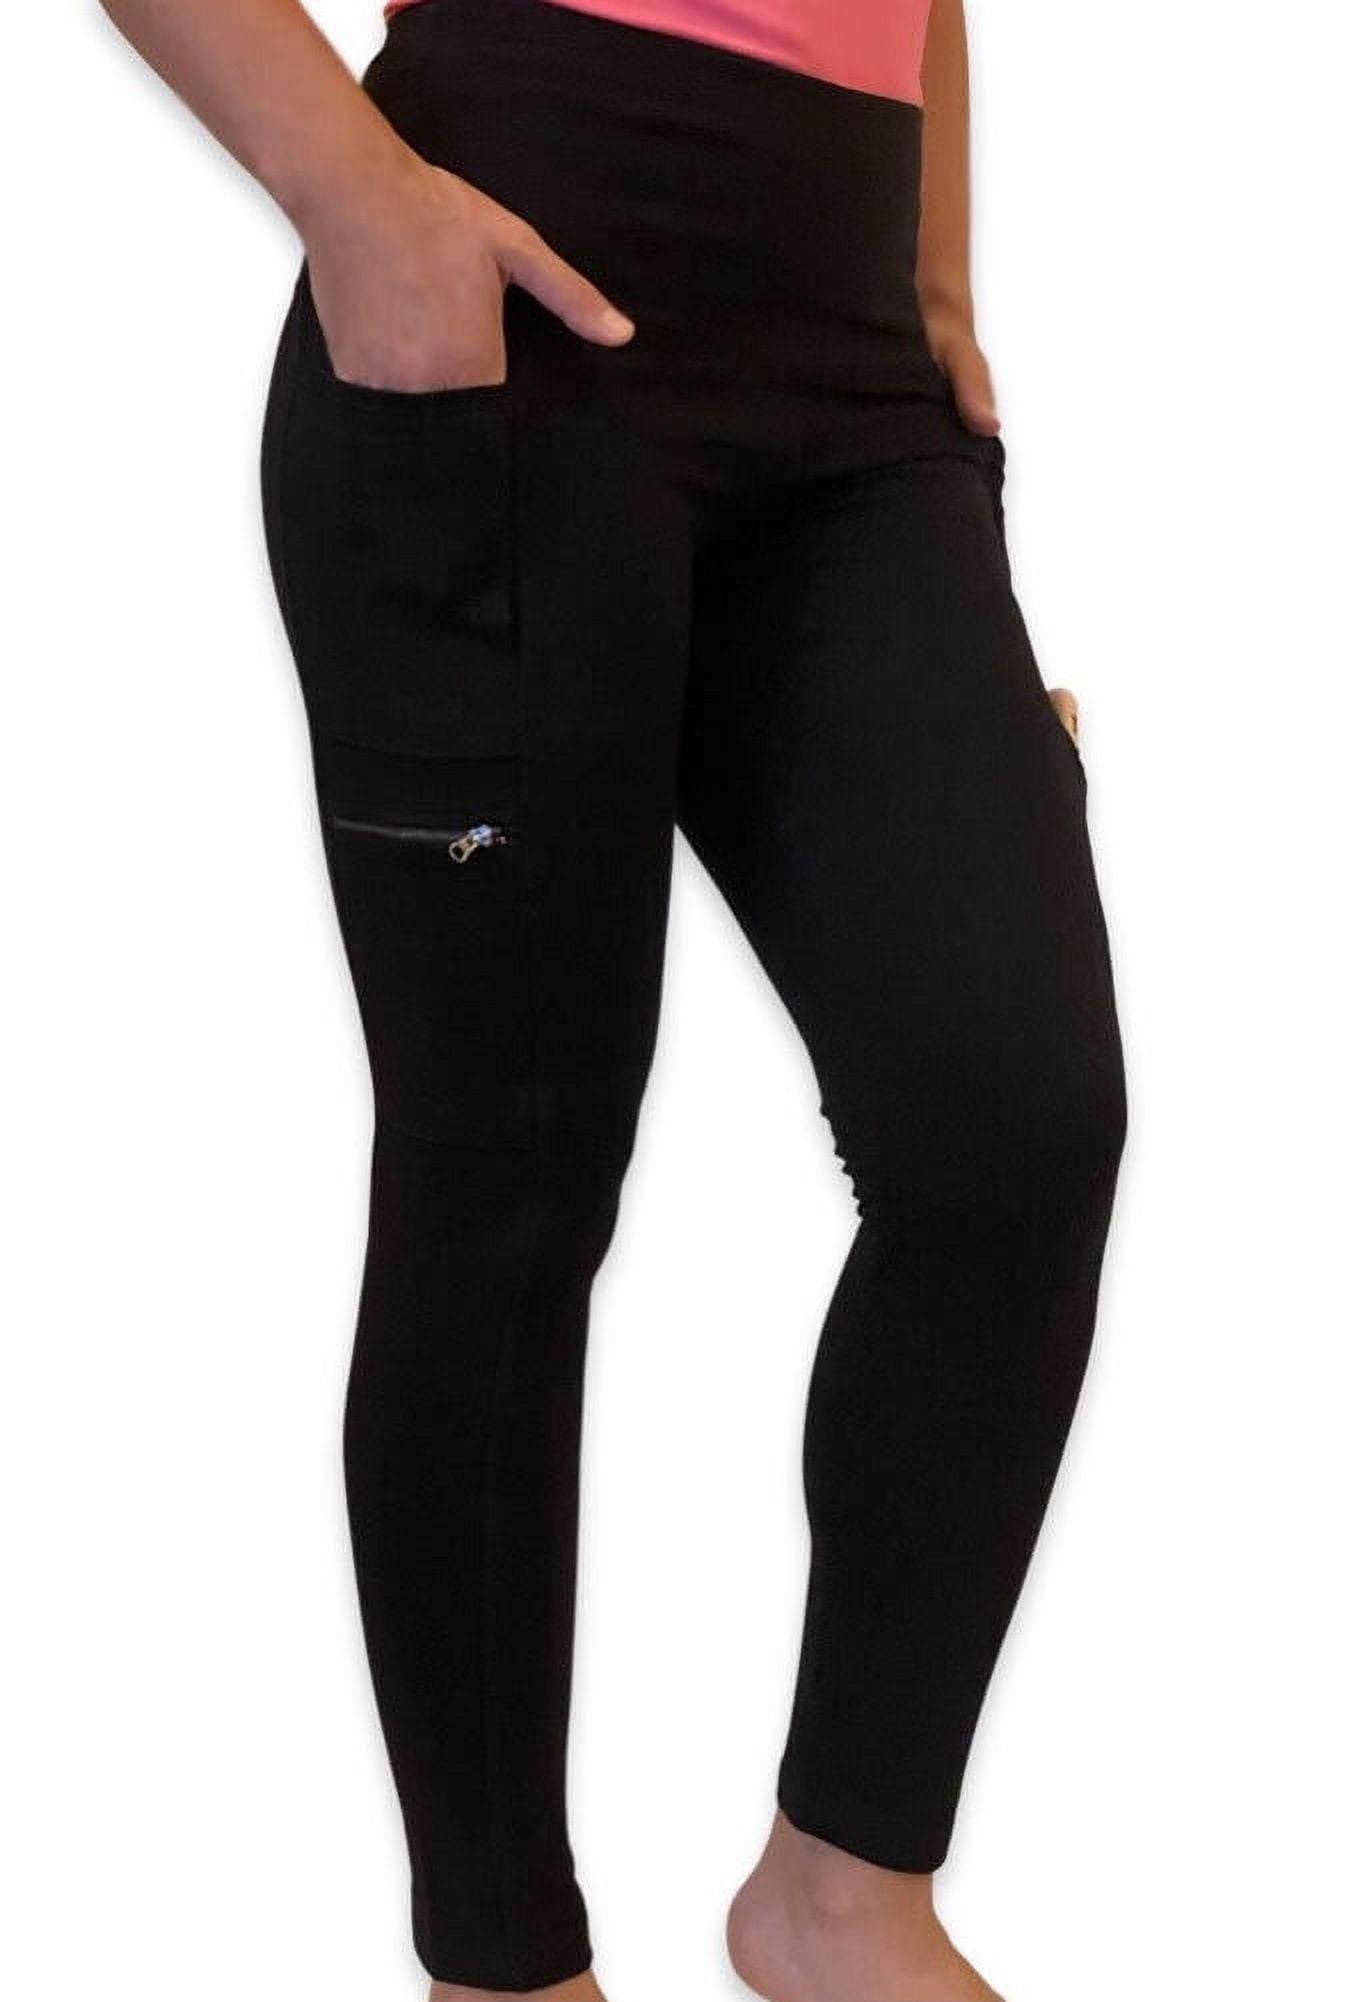 French Laundry Cellphone Pocket and Zip Leggings - Black 